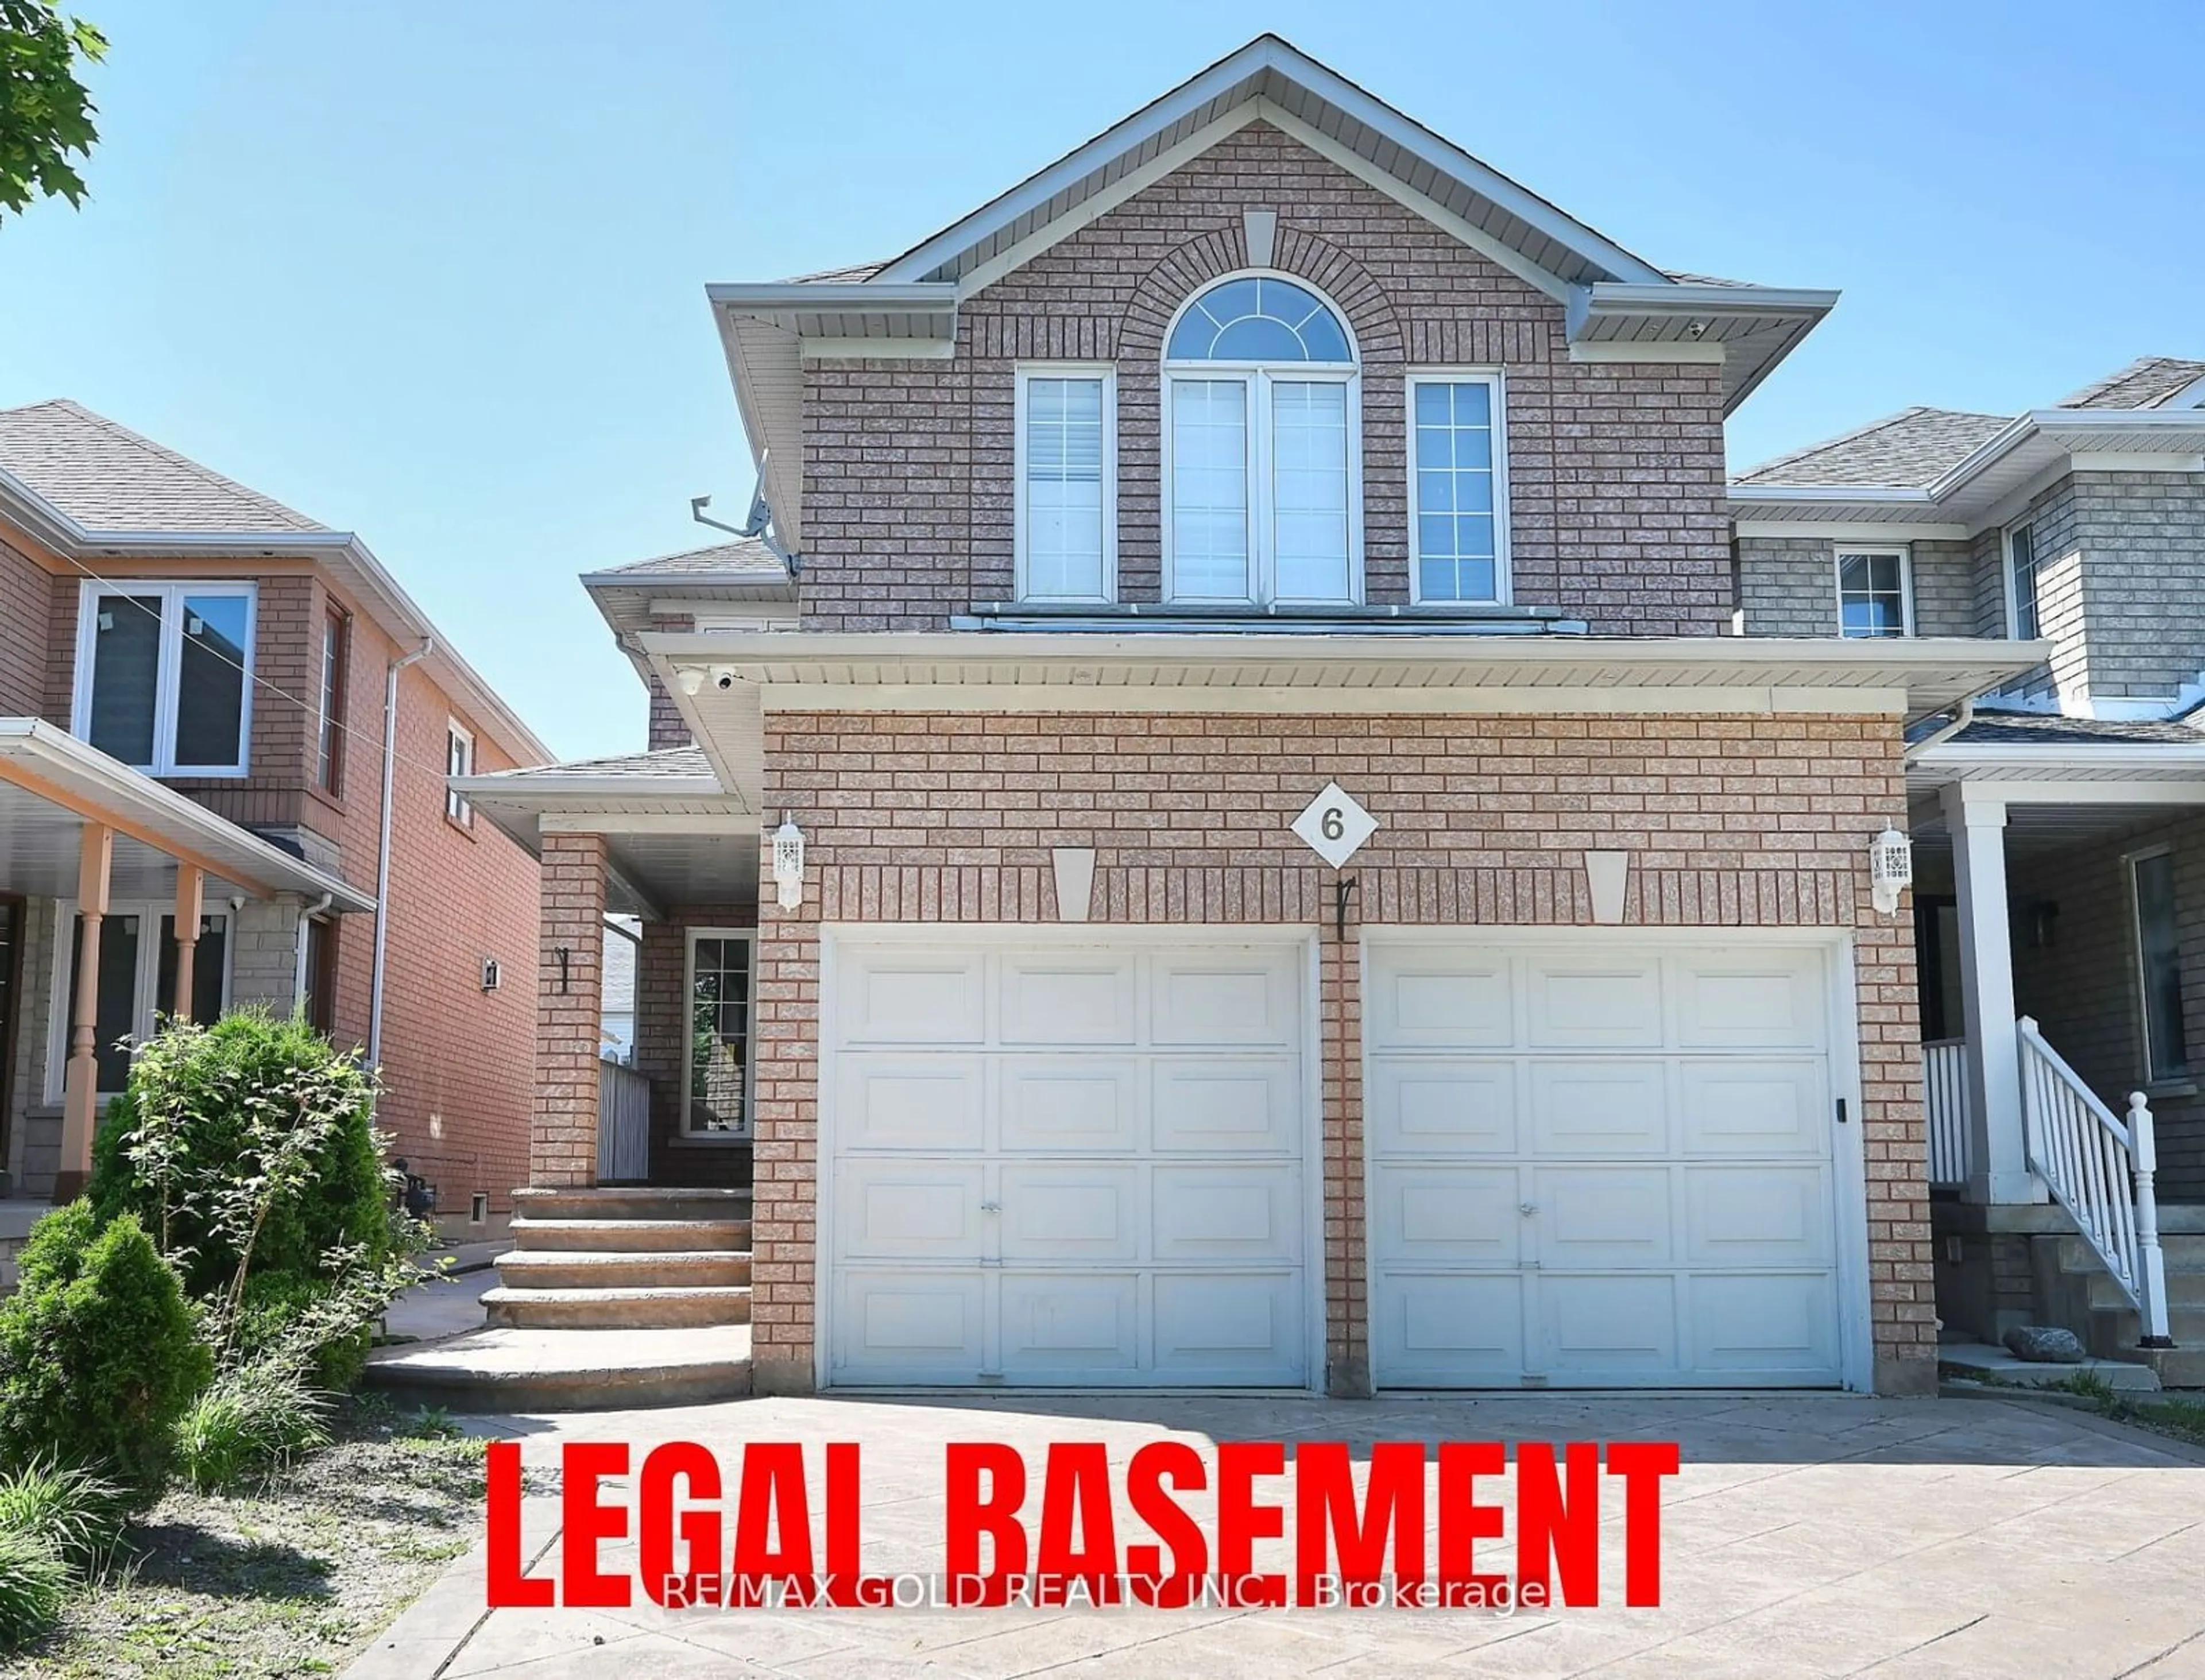 Frontside or backside of a home for 6 Oatfield Rd, Brampton Ontario L6R 1W1